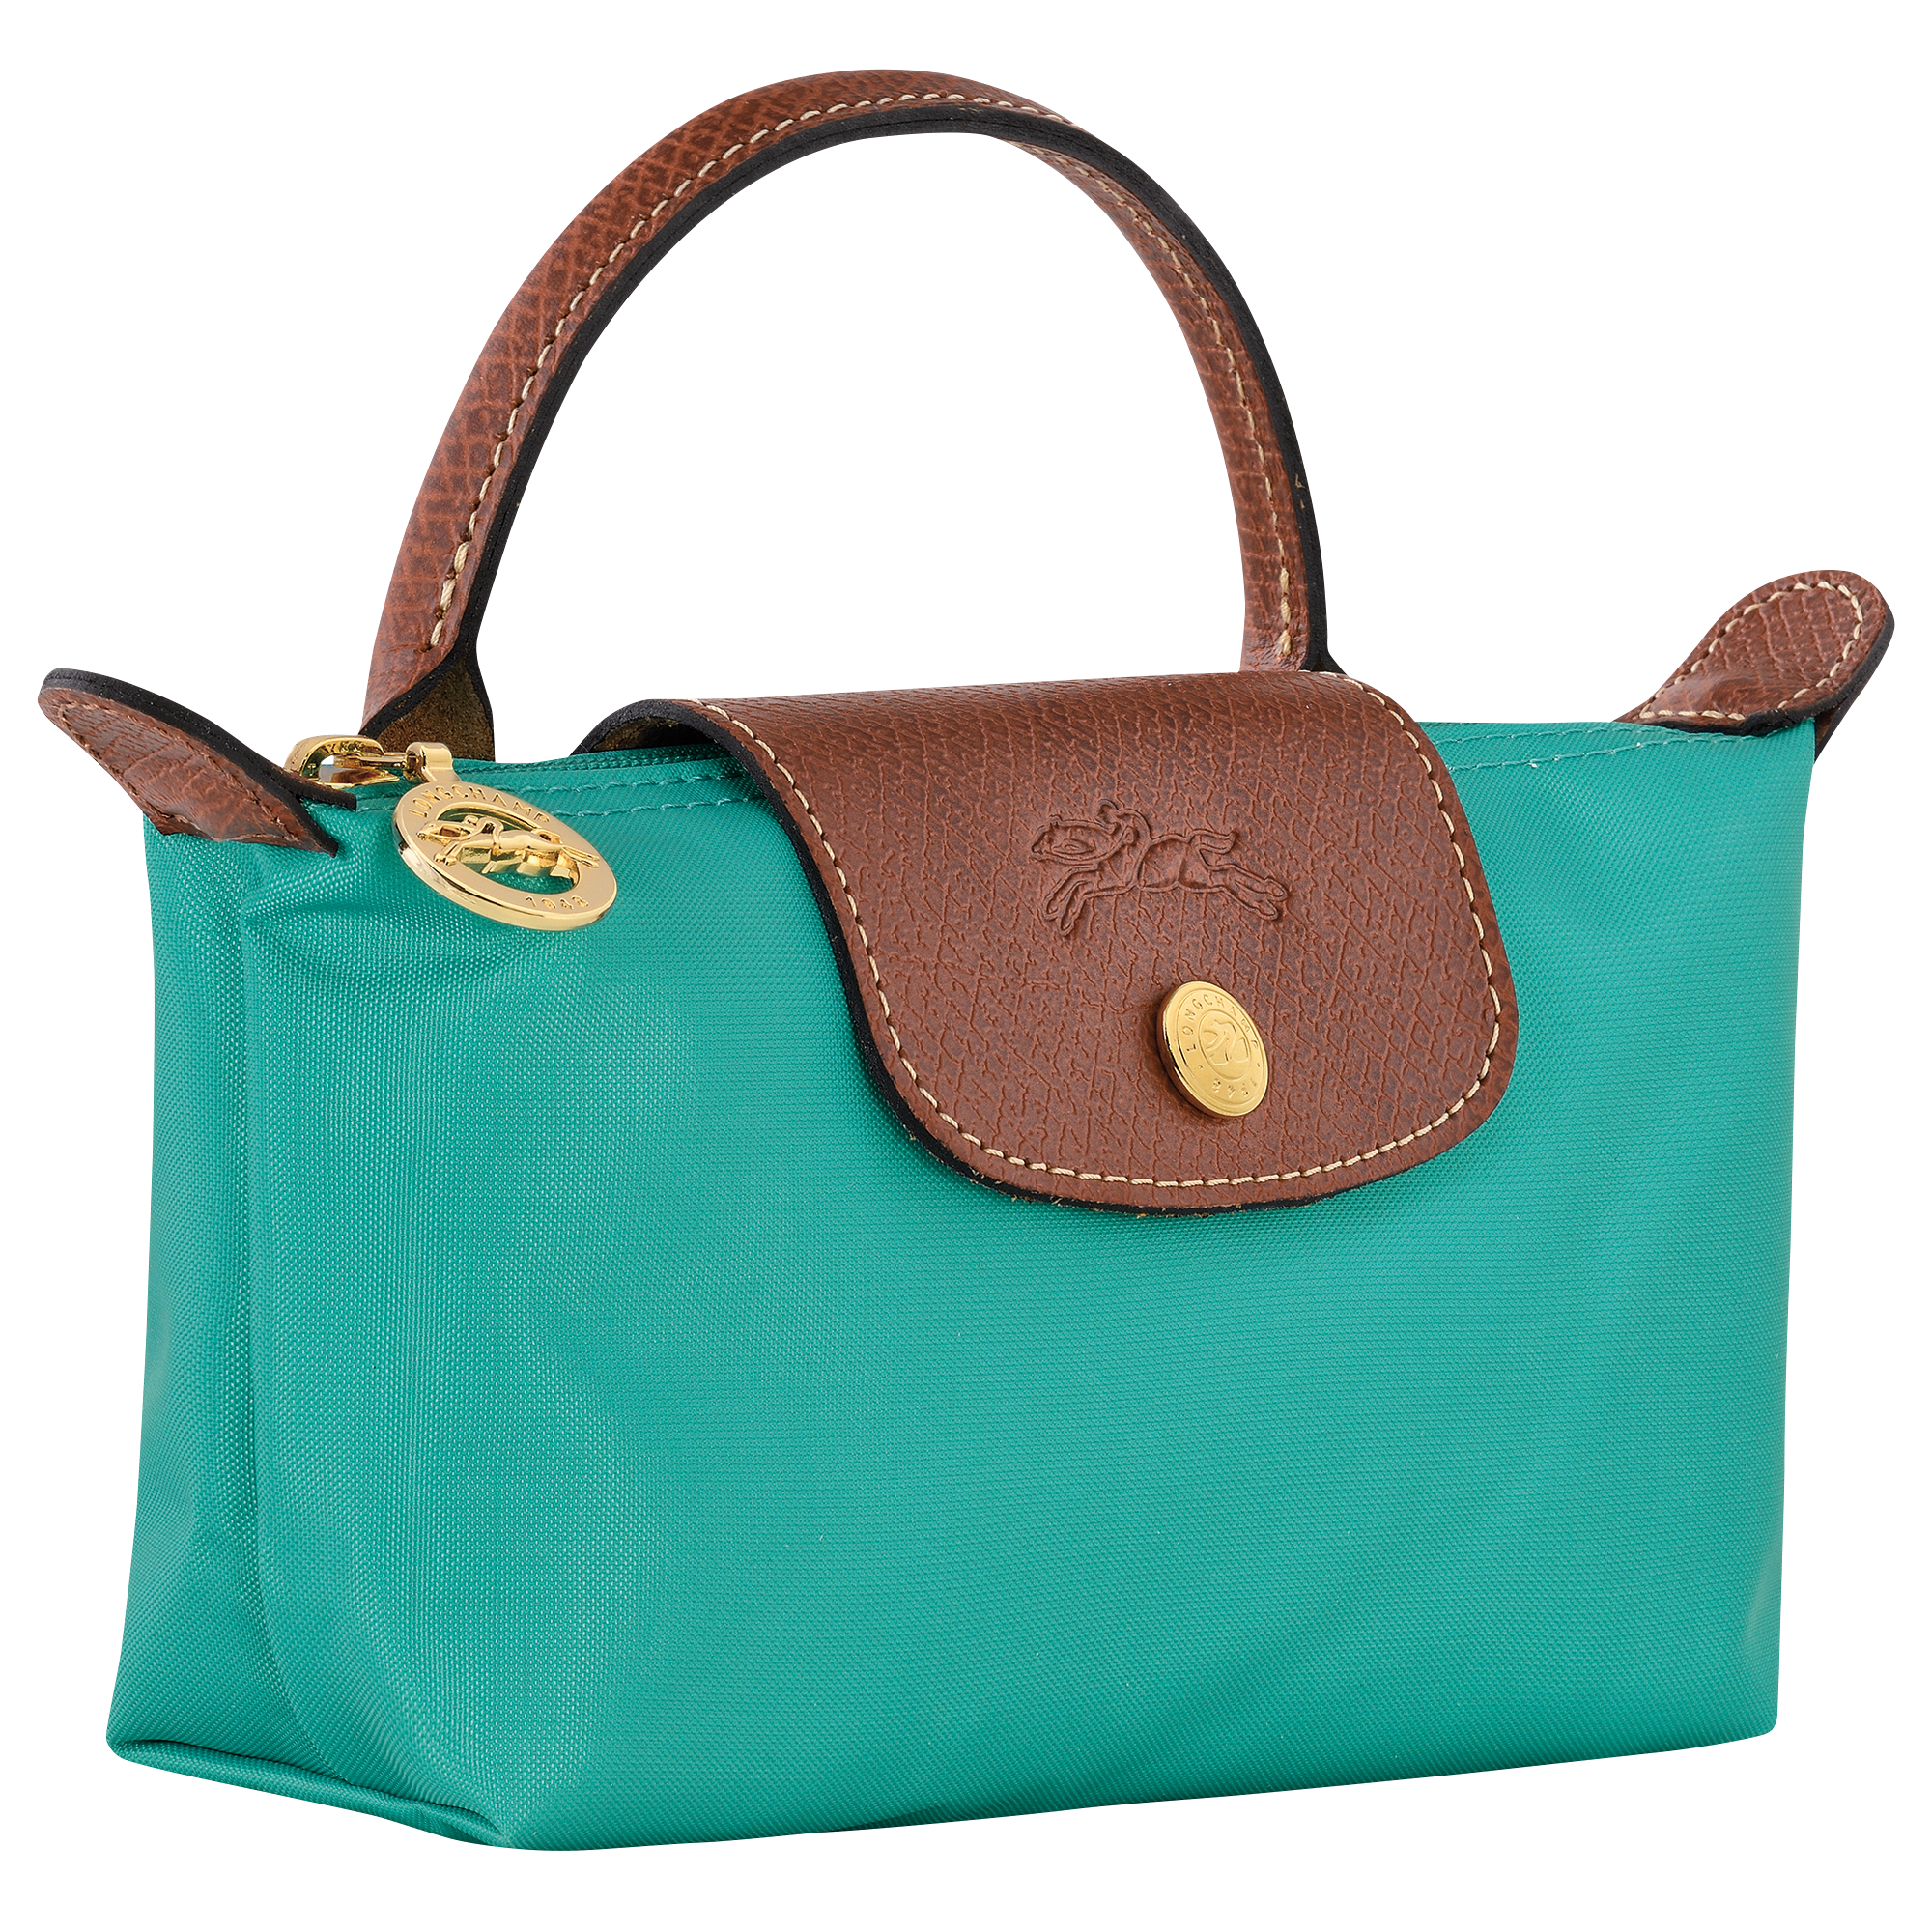 Le Pliage Original Pouch with handle, Turquoise